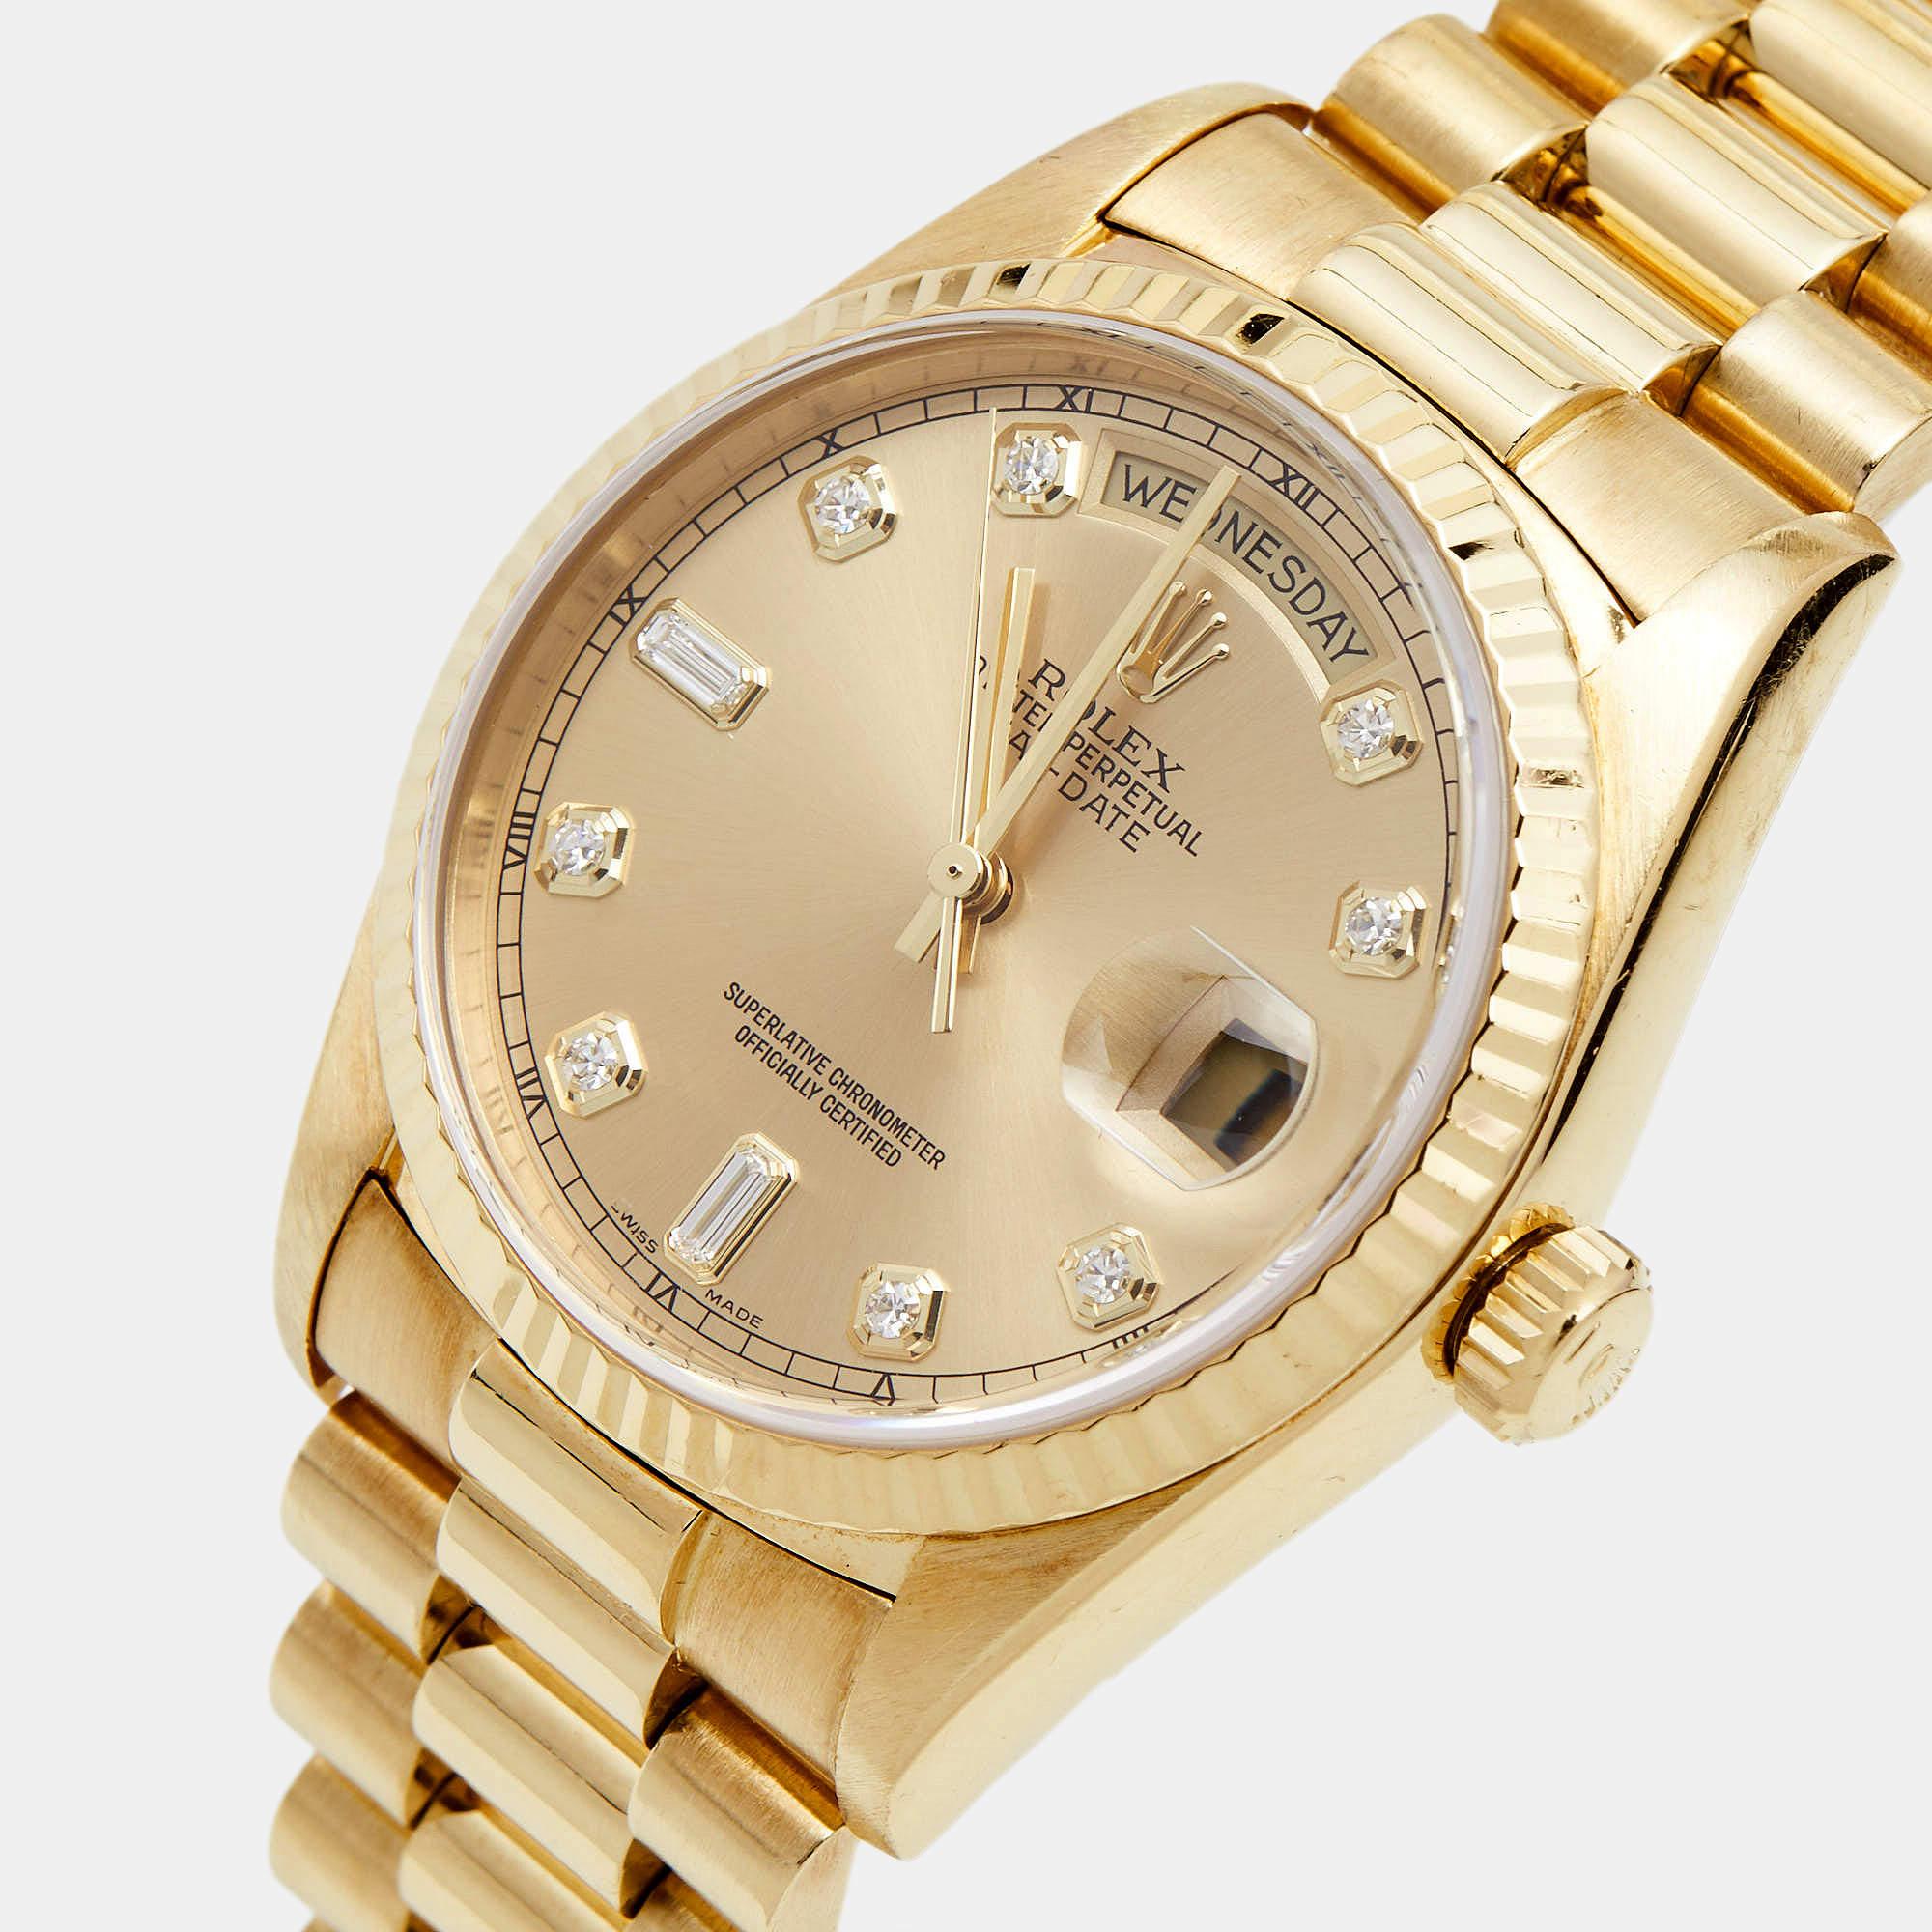 This beautiful Rolex Datejust for men will be a fine investment. Crafted using 18k yellow gold, the automatic watch features a champagne dial set with diamond hour markers, a date window, and three hands. Iconic, comfortable, and simply classy, this